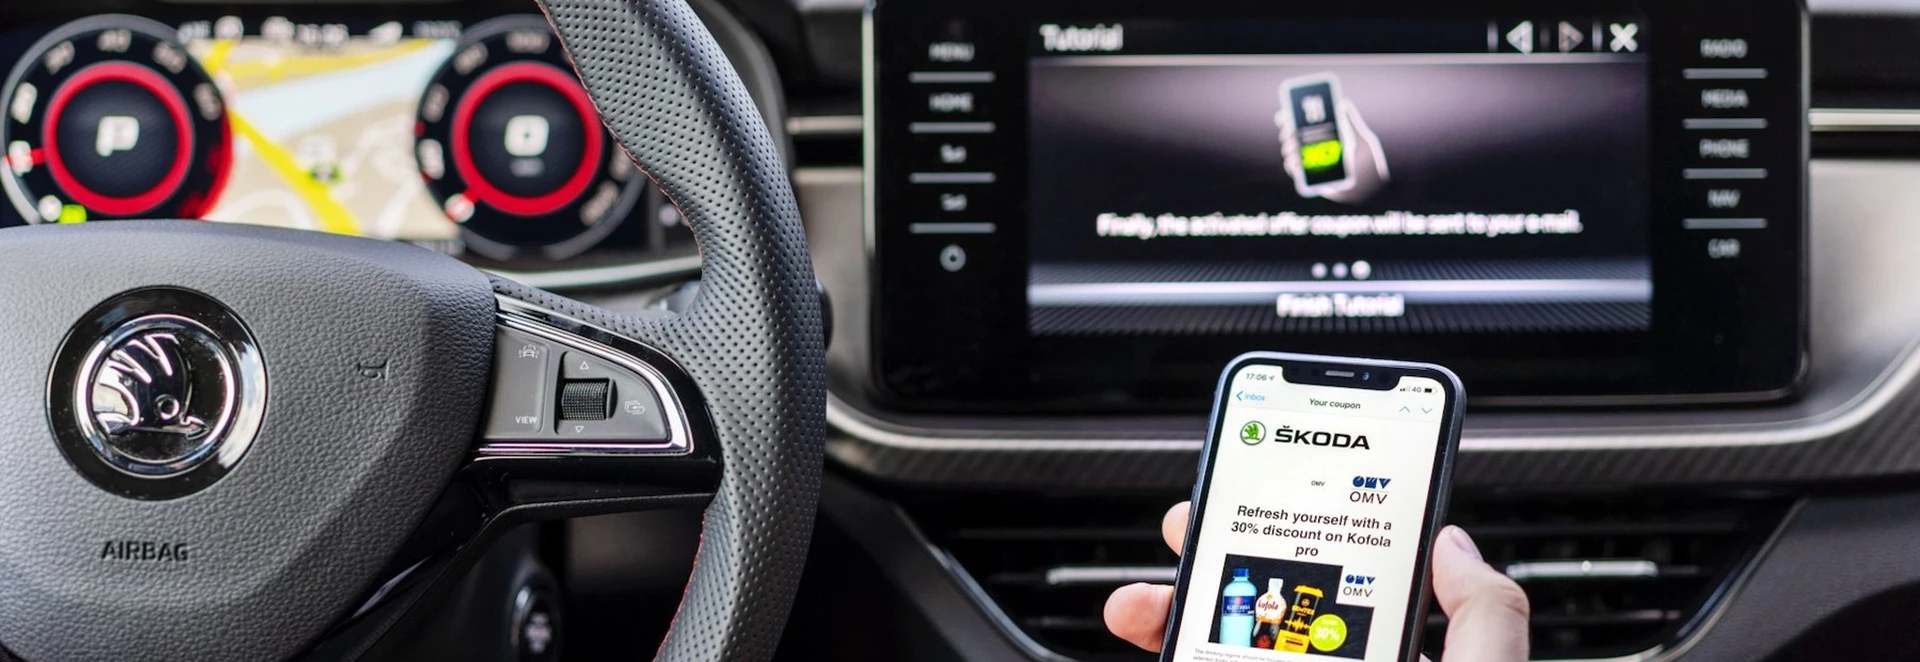 Skoda Marketplace launches to give drivers in-car alerts to discounts at nearby shops 